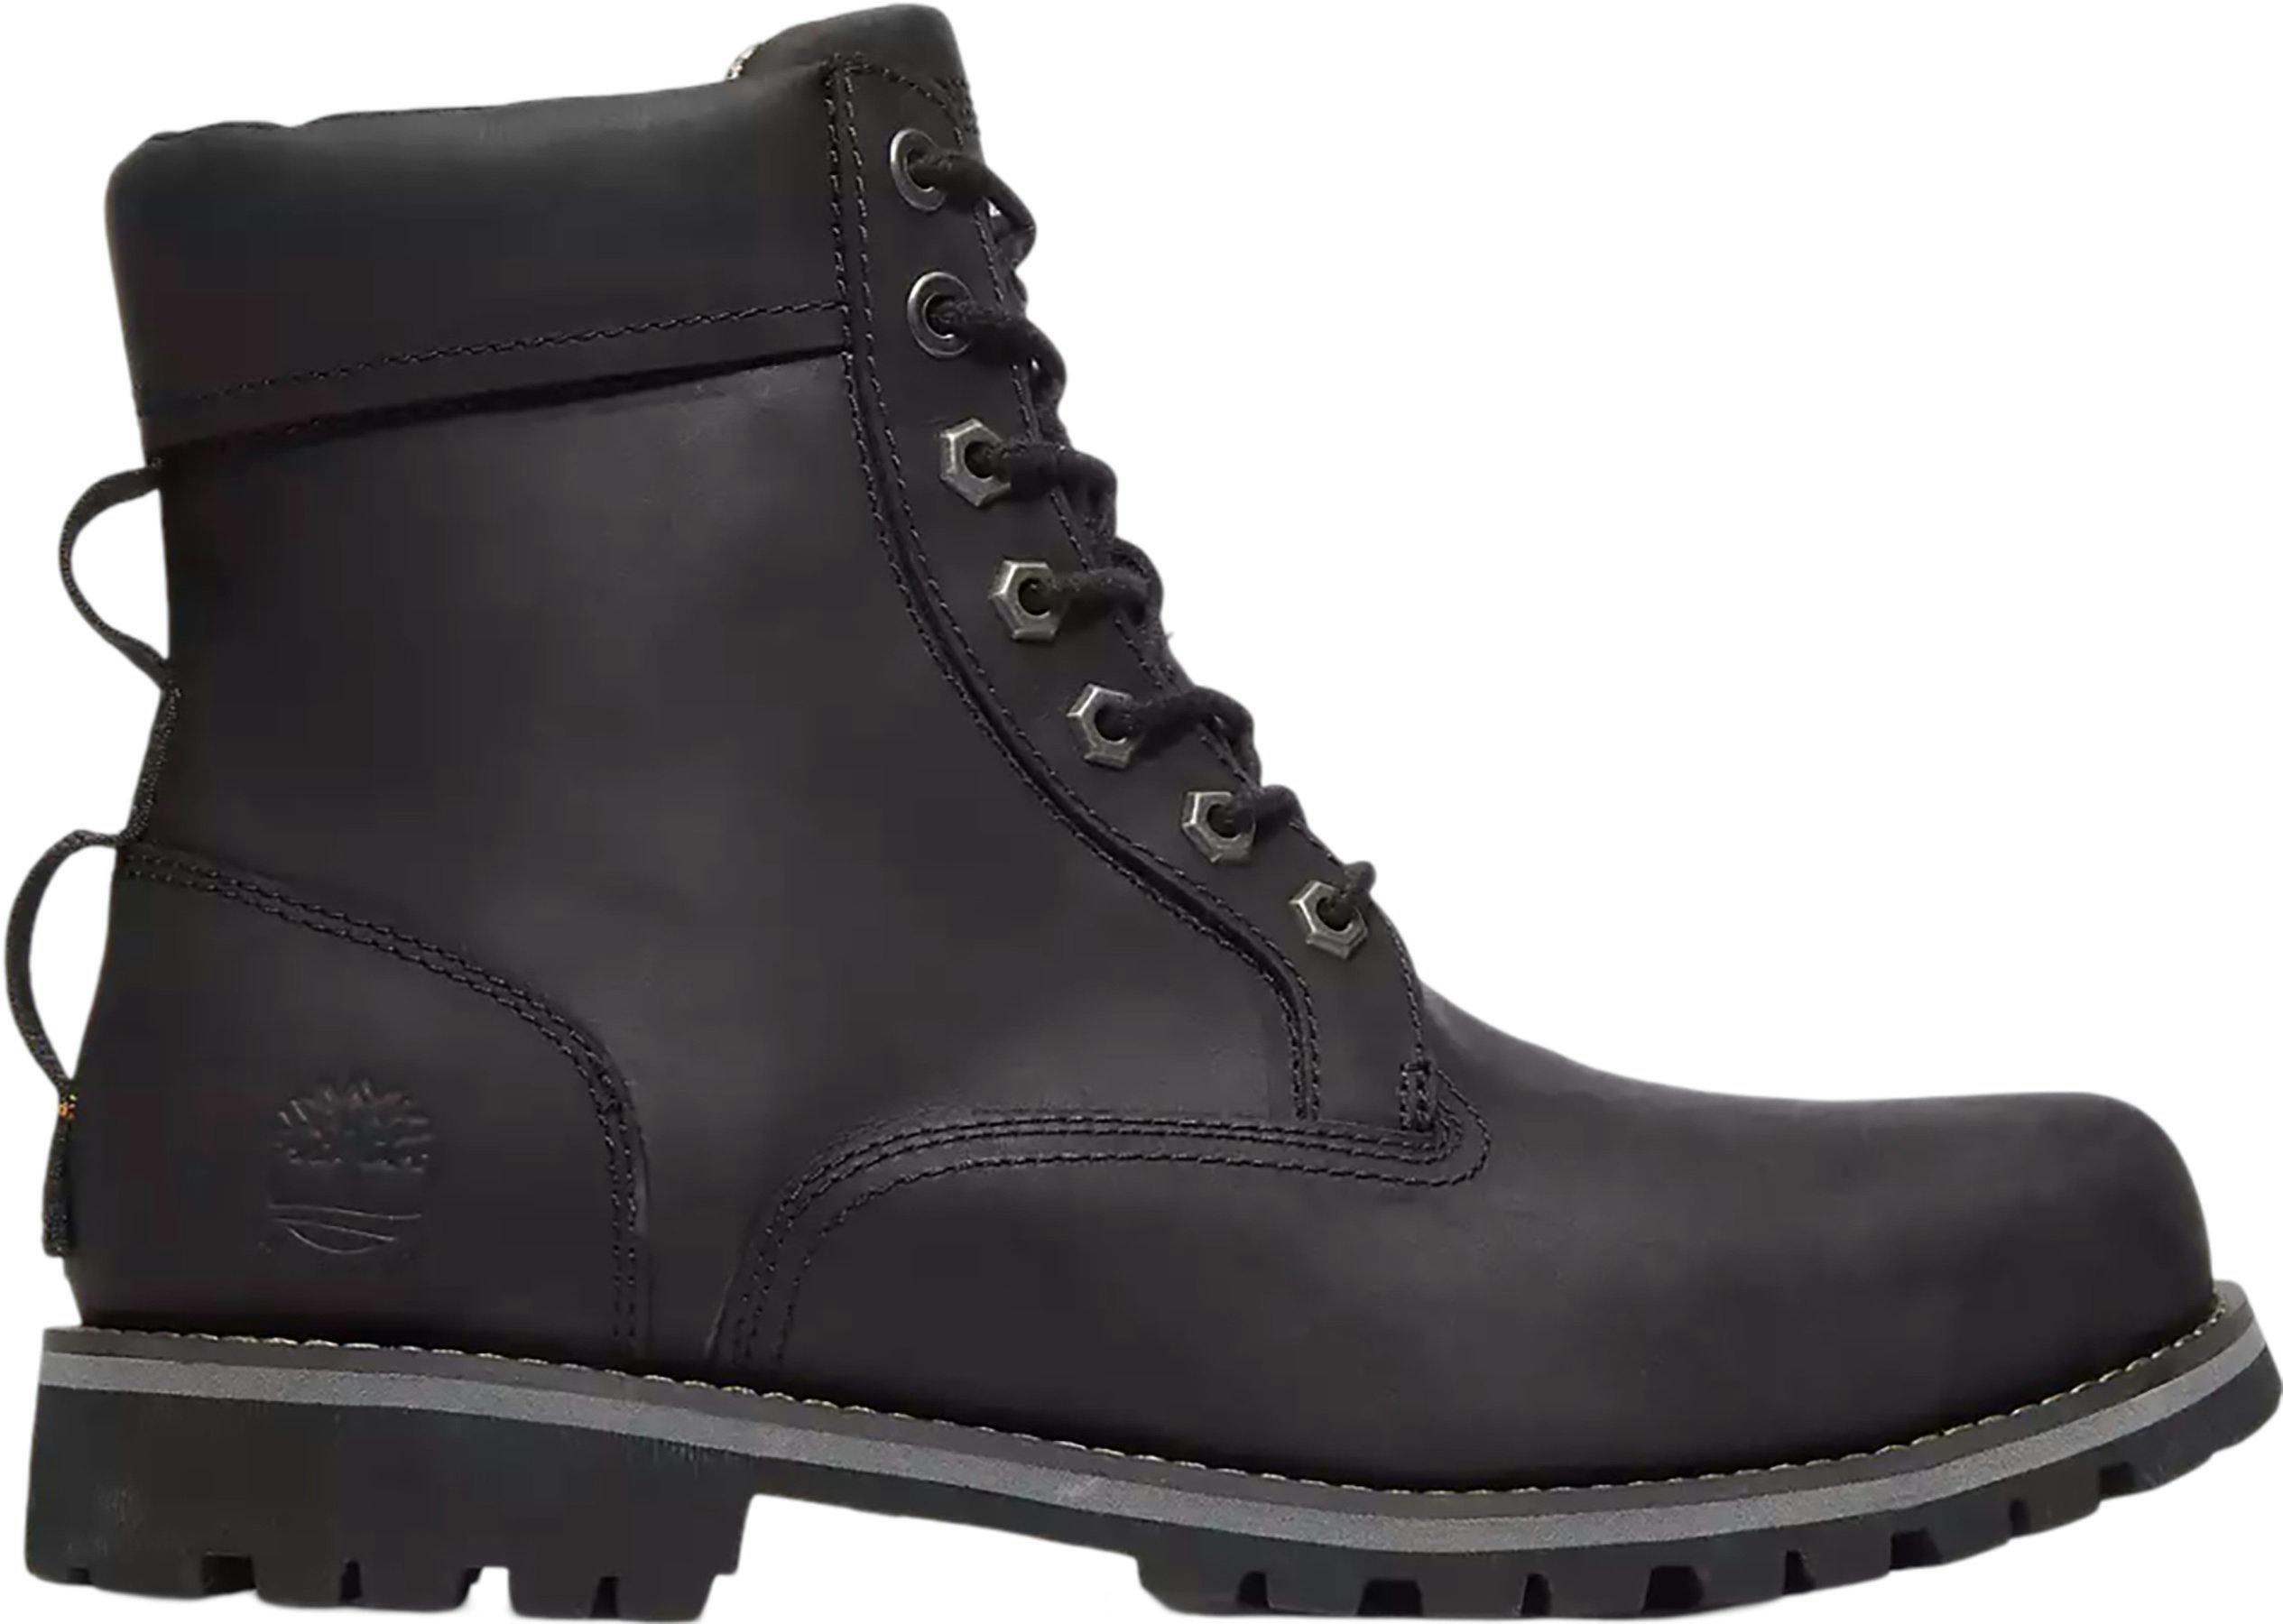 Product image for Rugged 6 Inch Waterproof Boots - Men's